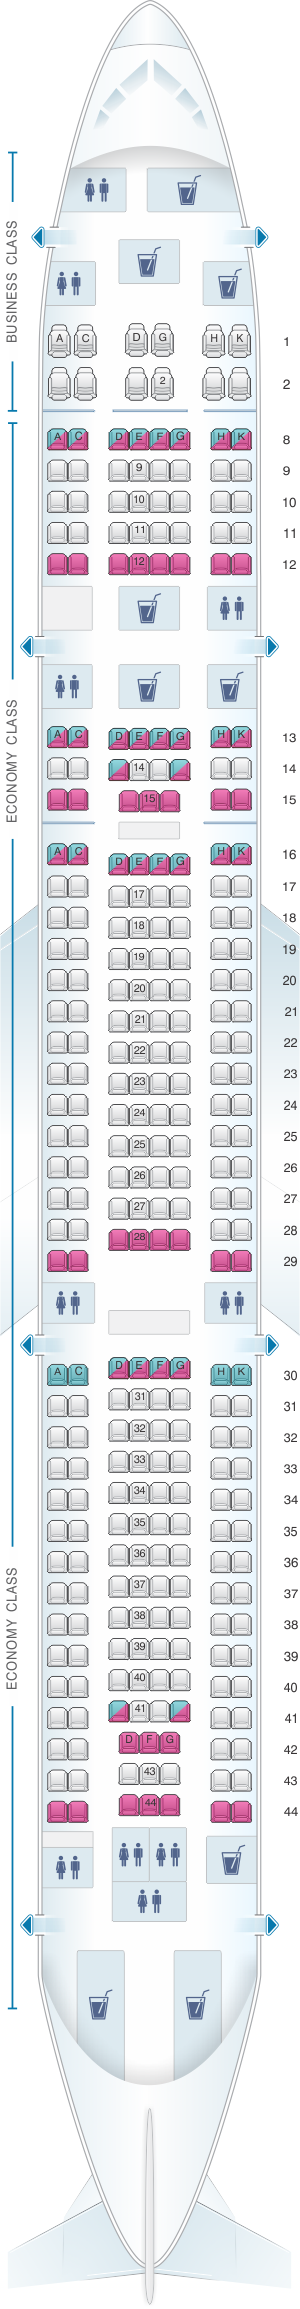 Seat map for Hi Fly Airbus A340 300 TQM 300pax